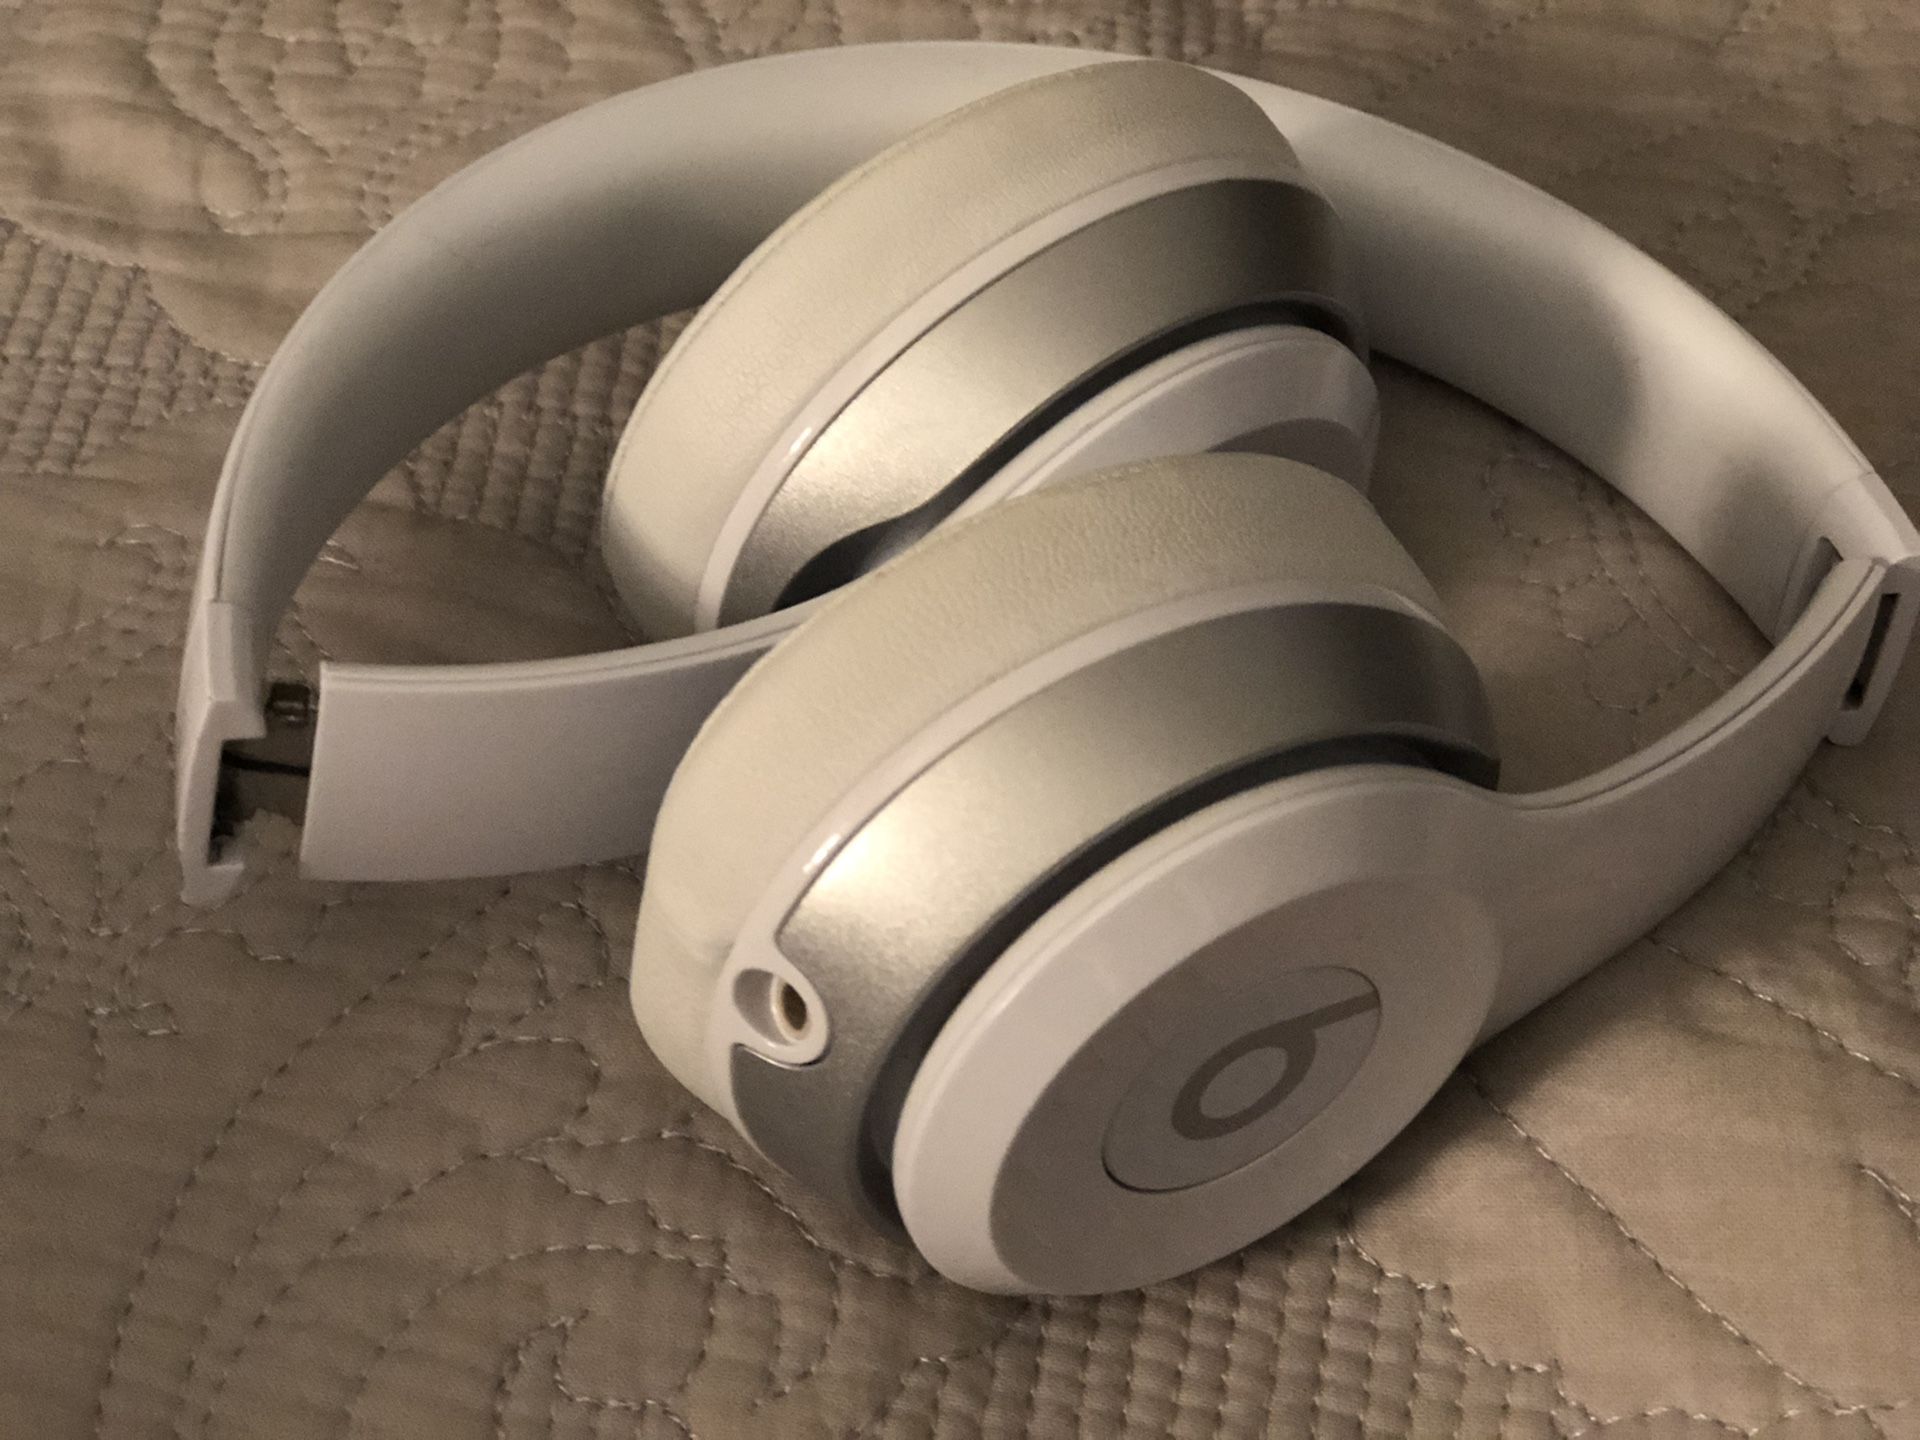 Beats Solo 2 Wired On-Ear Headphone - White